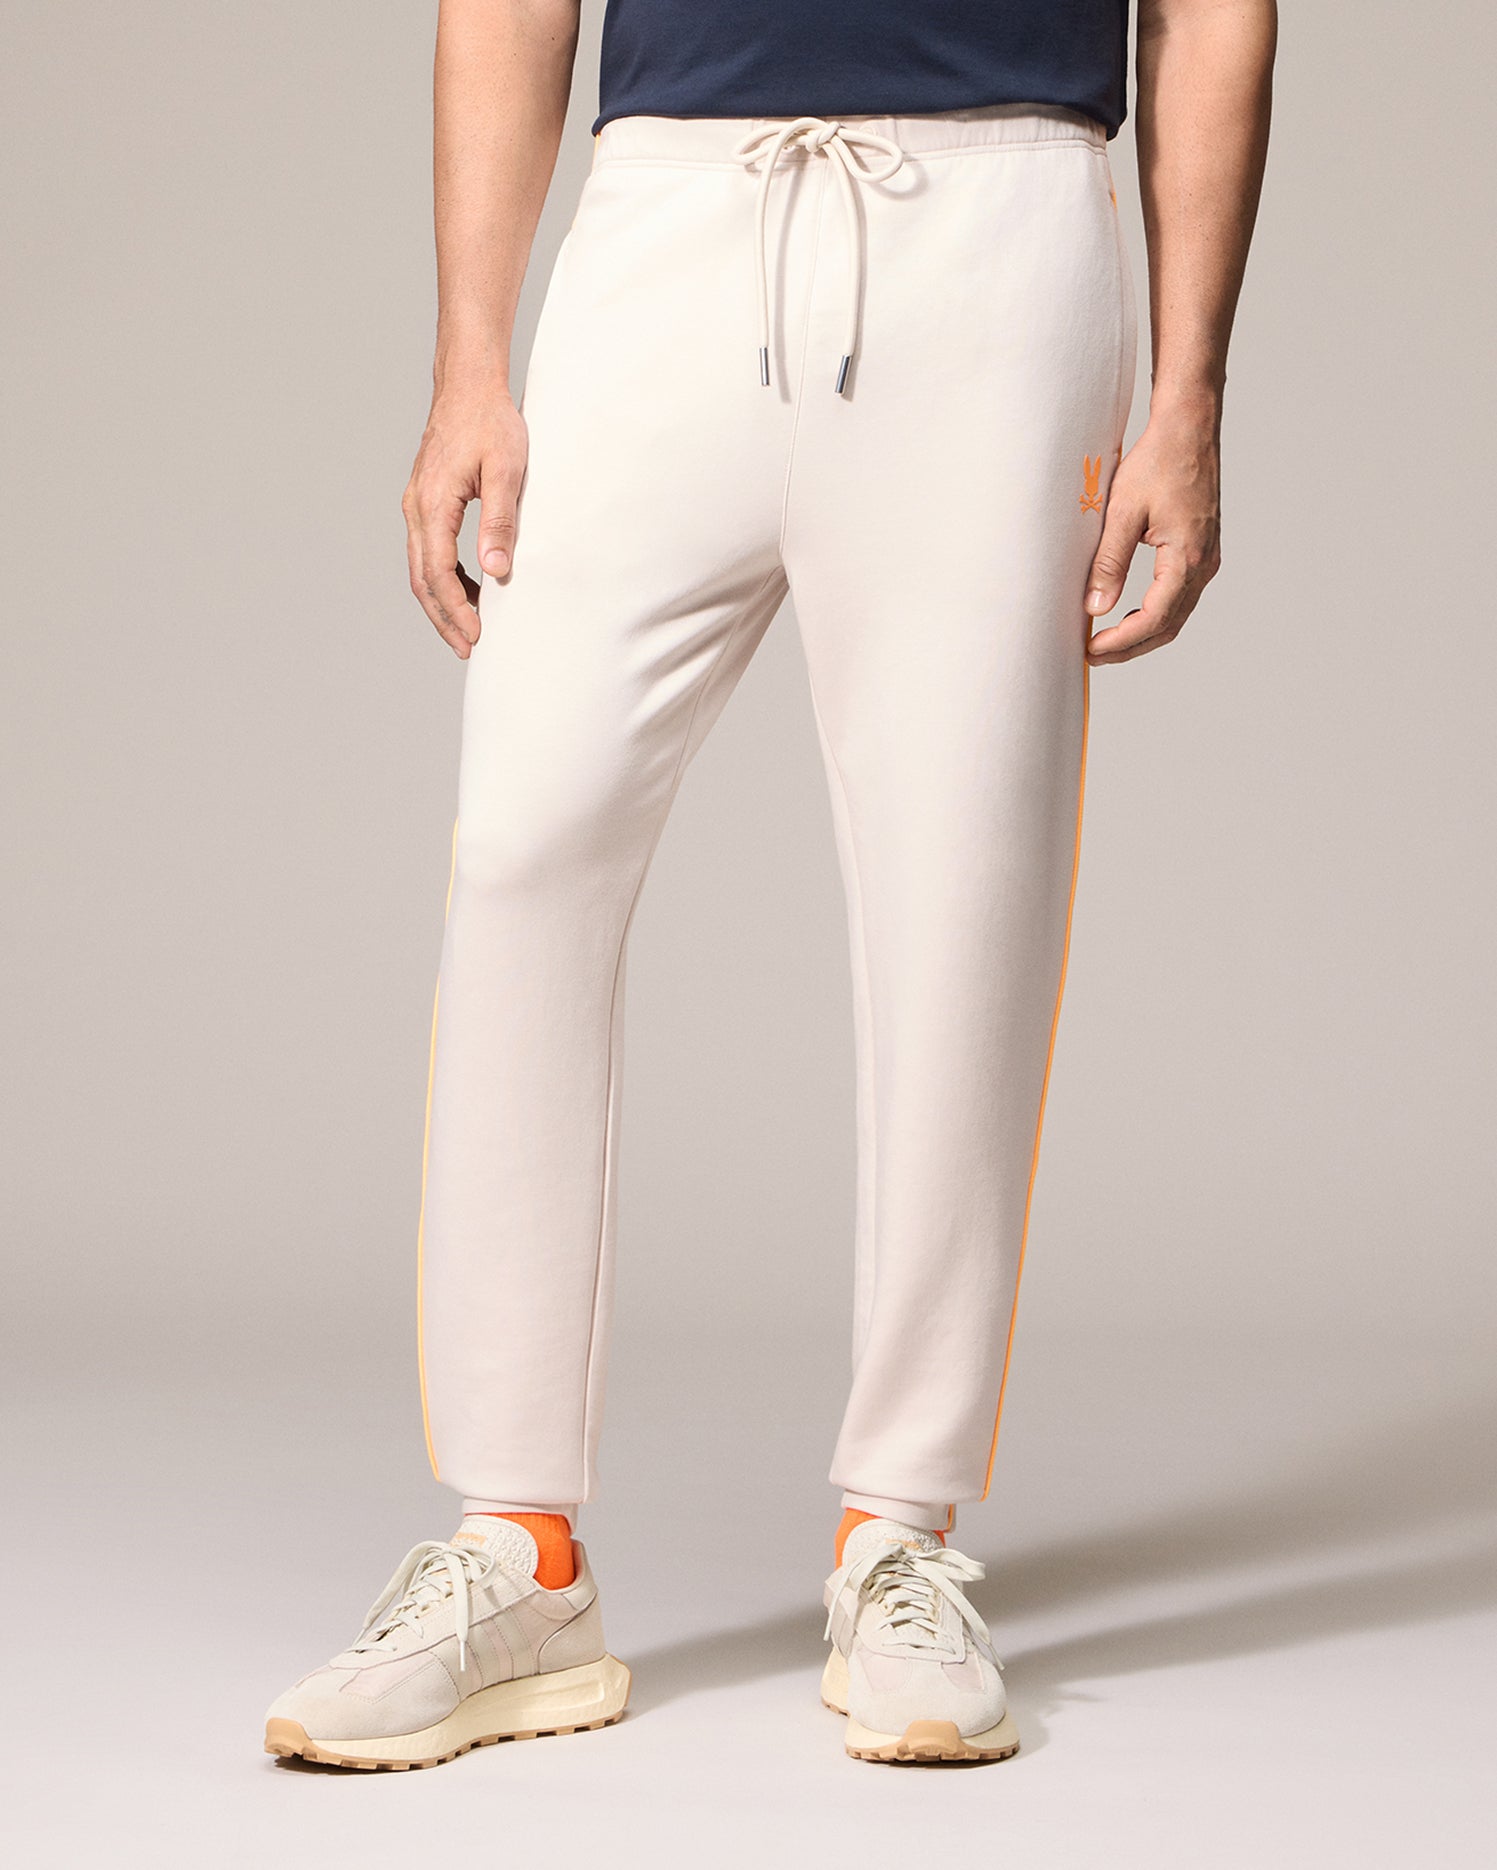 Psycho Bunny Men's Sweatpants Collection Comfy and Stylish Loungewear –  Psycho Bunny Canada